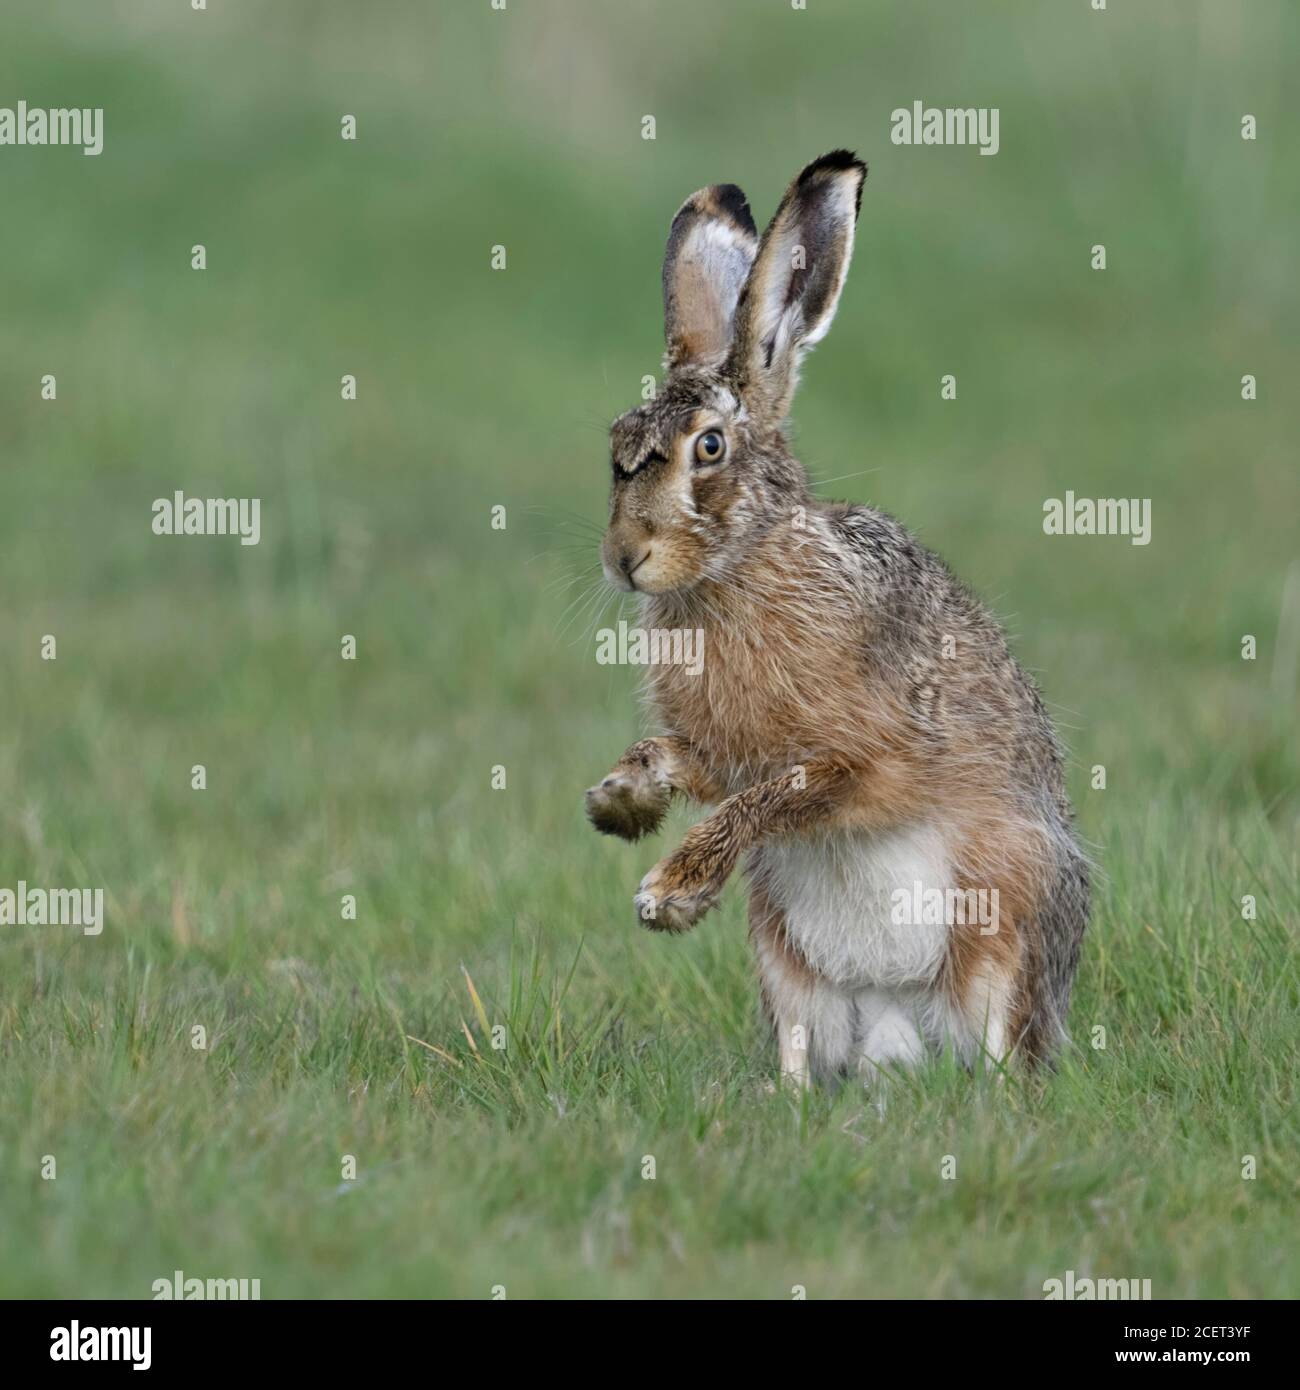 Brown Hare / European Hare / Feldhase ( Lepus europaeus ) sitting on hind legs, shadow boxing with front paws, wildlife, Europe. Stock Photo